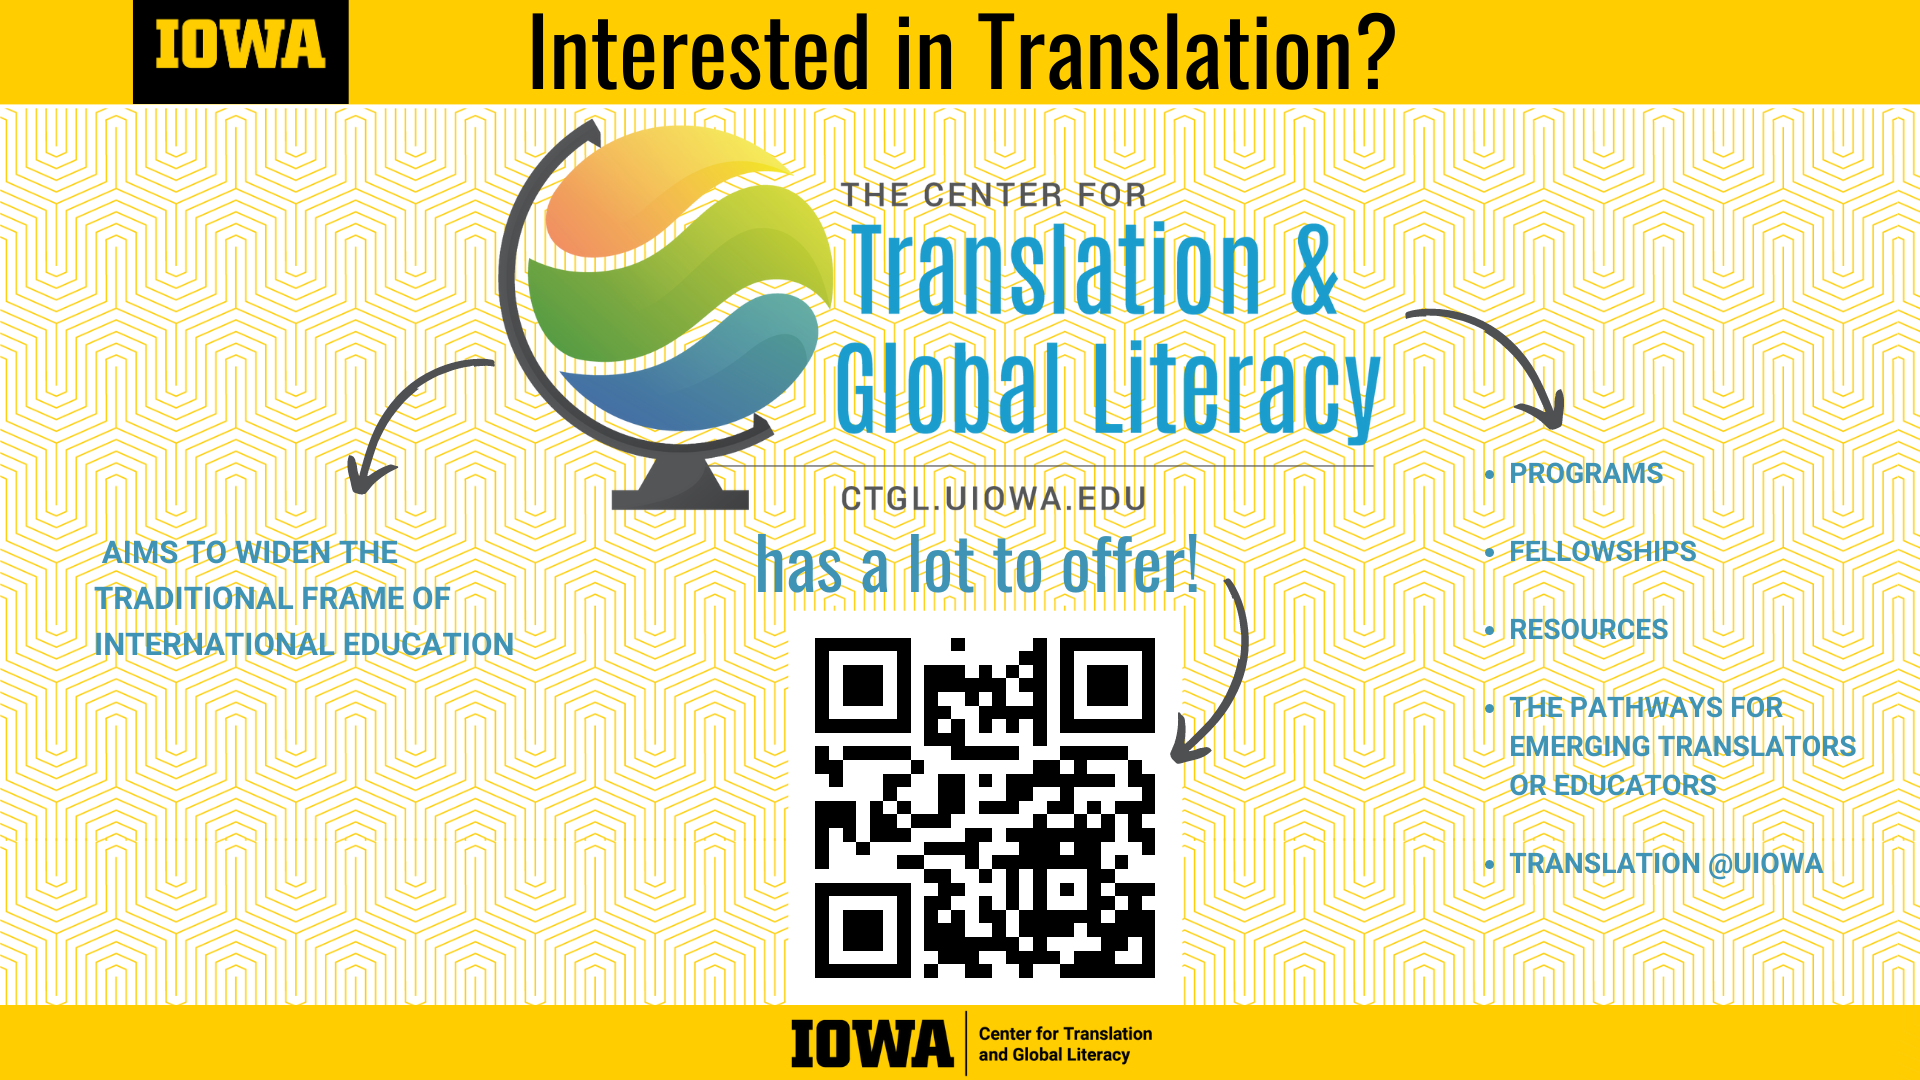 The Center for Translation and Global Literacy; If you're interested, visit us at ctgl.uiowa.edu for more information on programs, fellowships, resources, pathways for emerging translators and educators